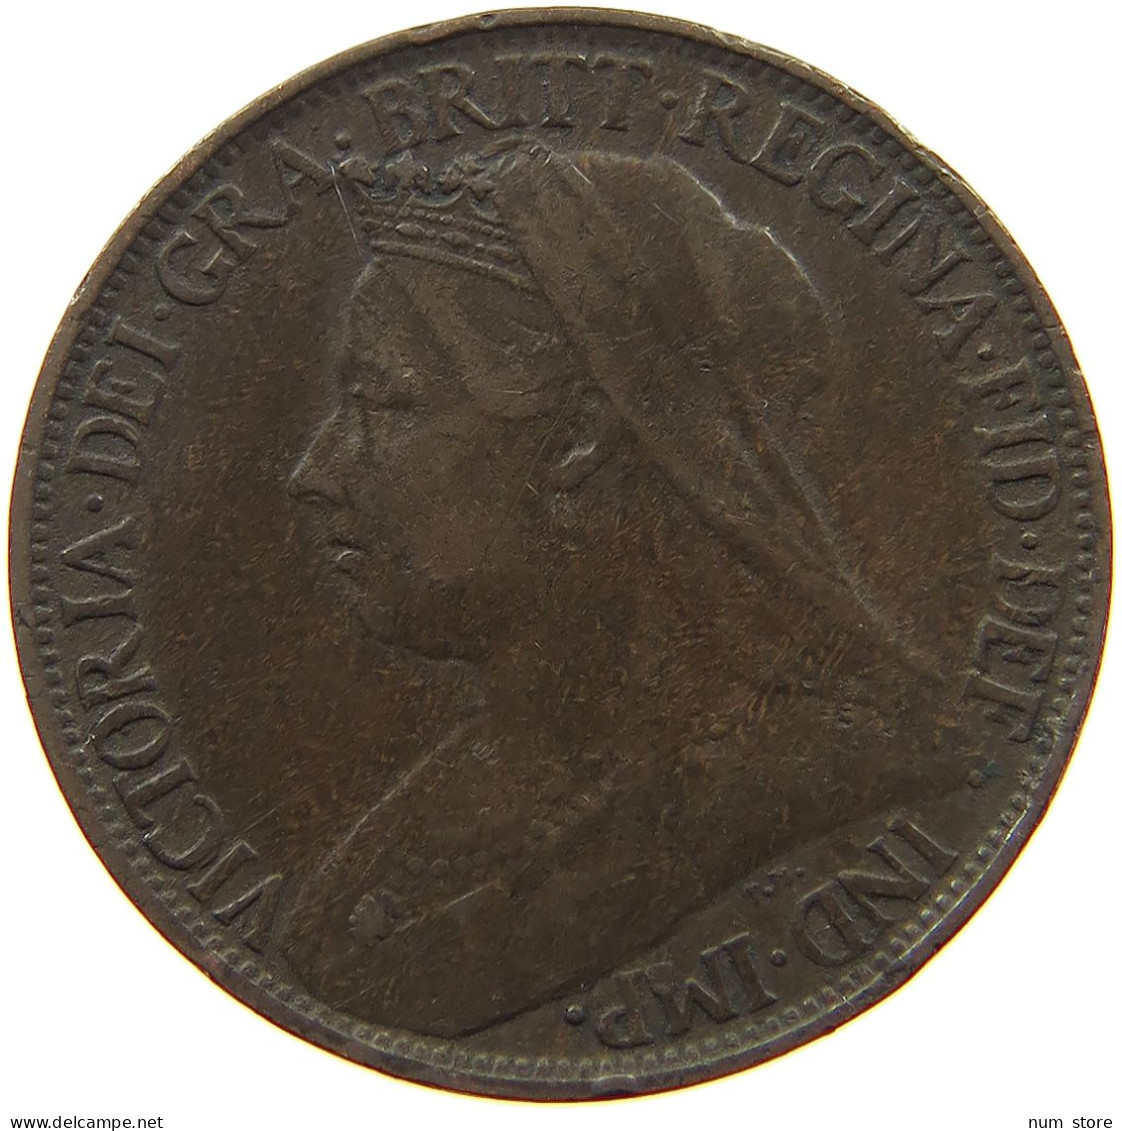 GREAT BRITAIN FARTHING 1897 Victoria 1837-1901 #a011 0939 - B. 1 Farthing